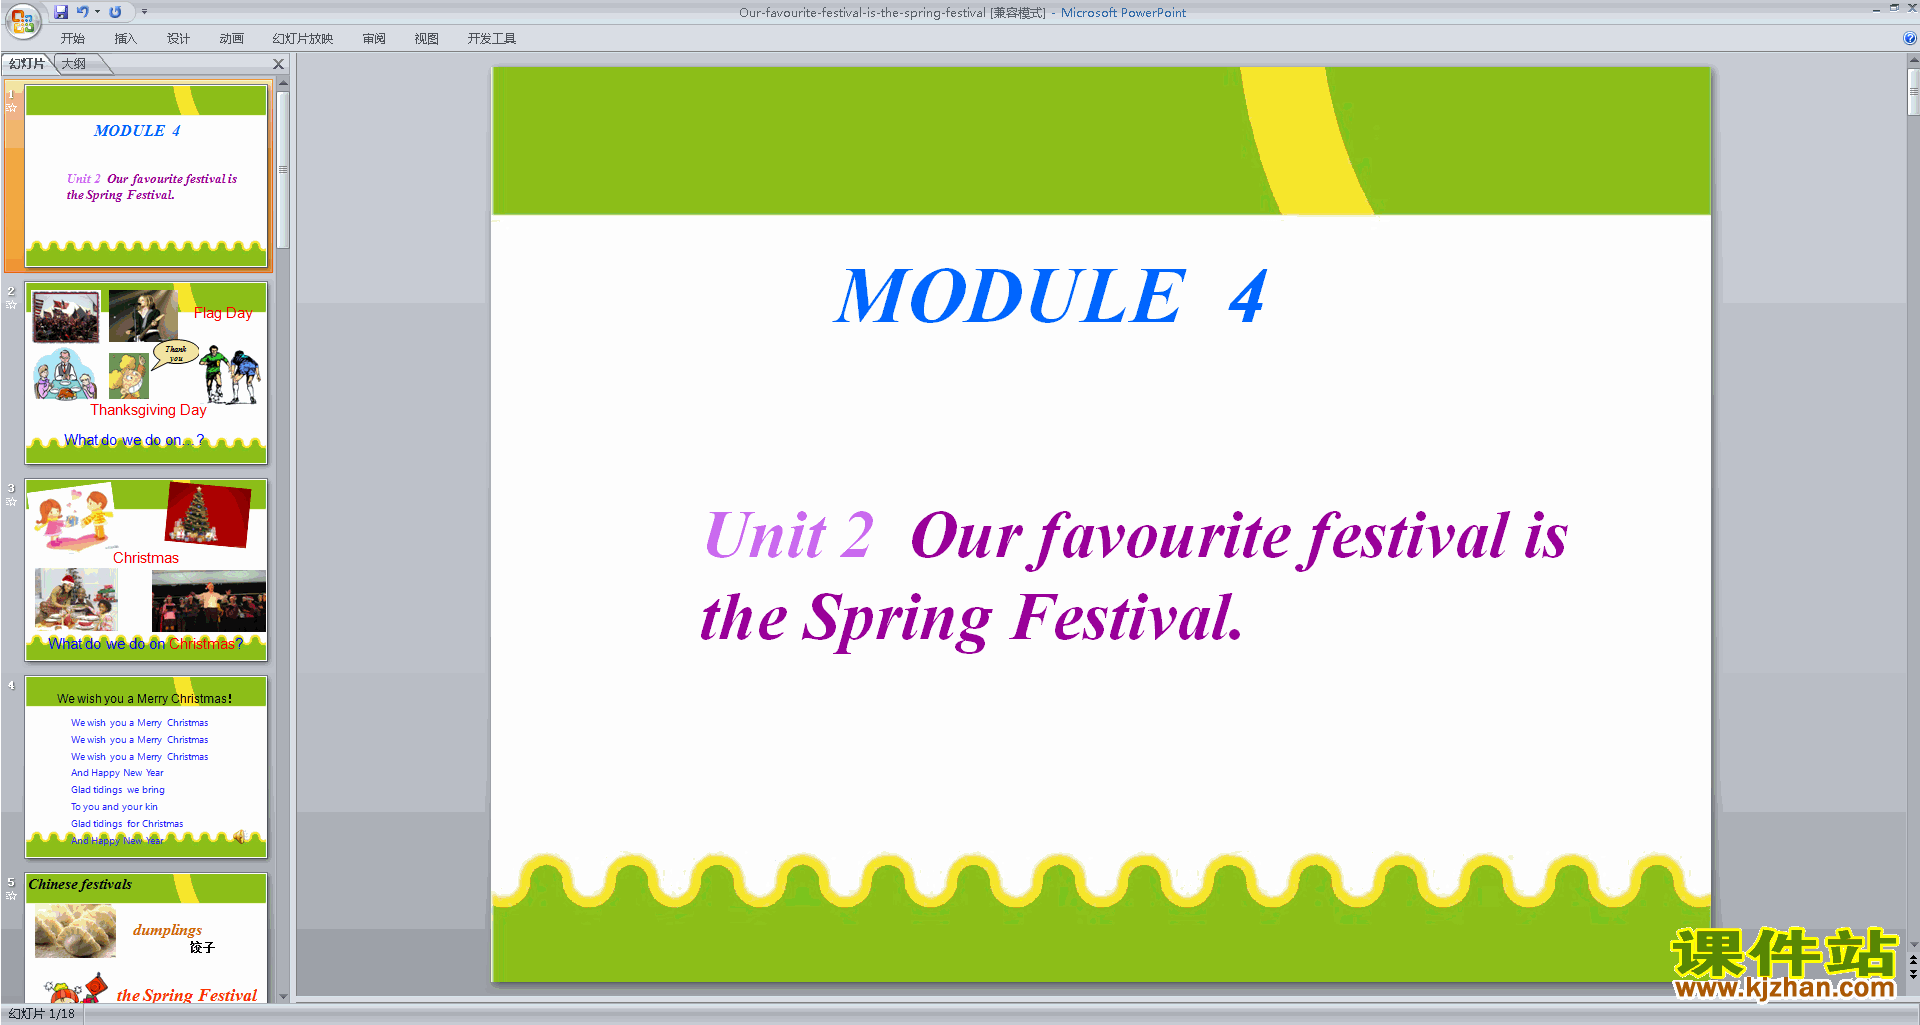 аPPT Unit2 Our favourite festival is the Spring Festiva